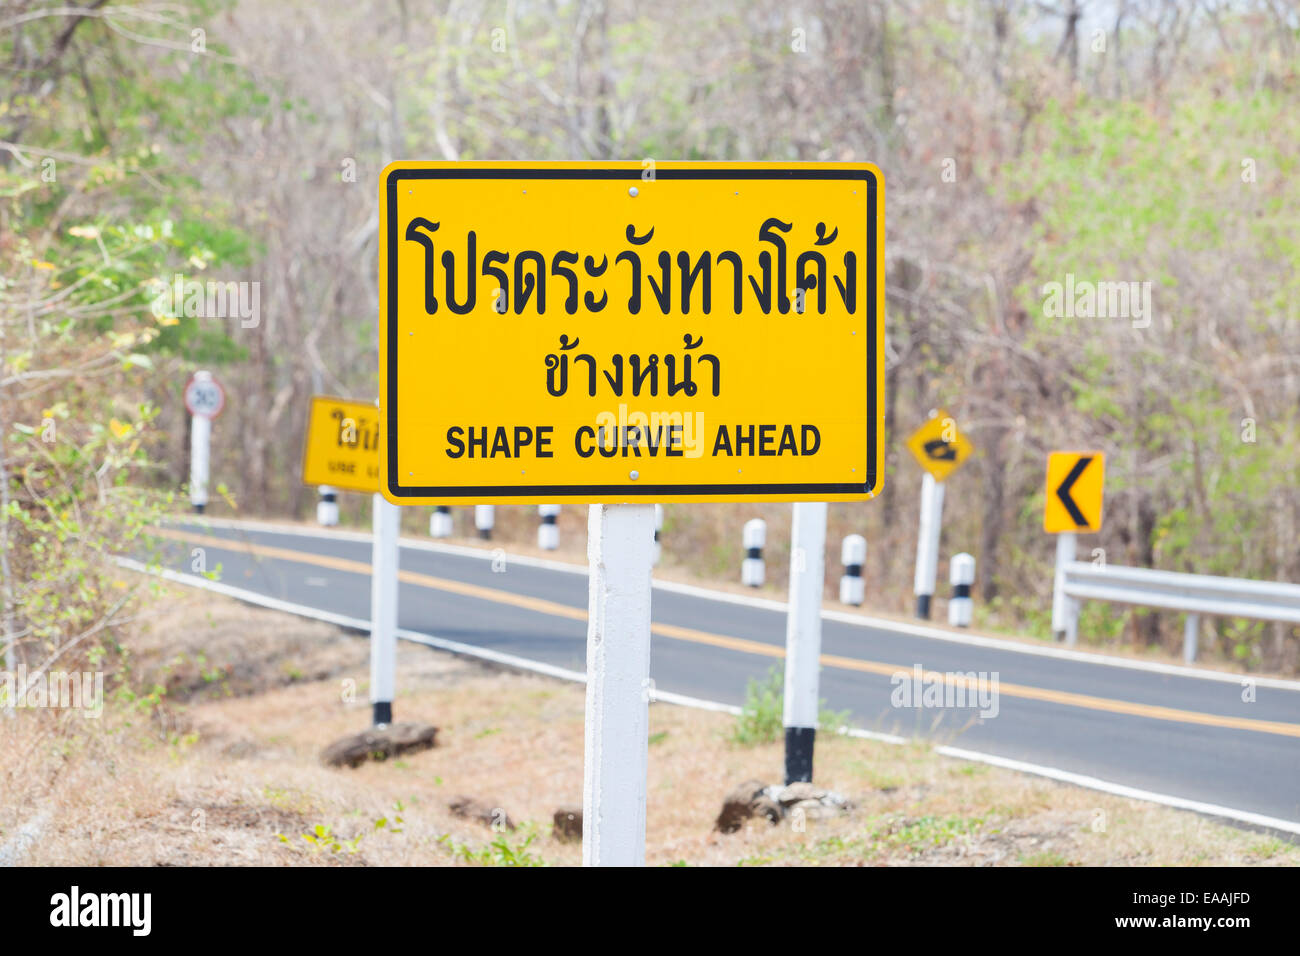 Amusing english spelling mistake on a road sign in Thailand Stock Photo